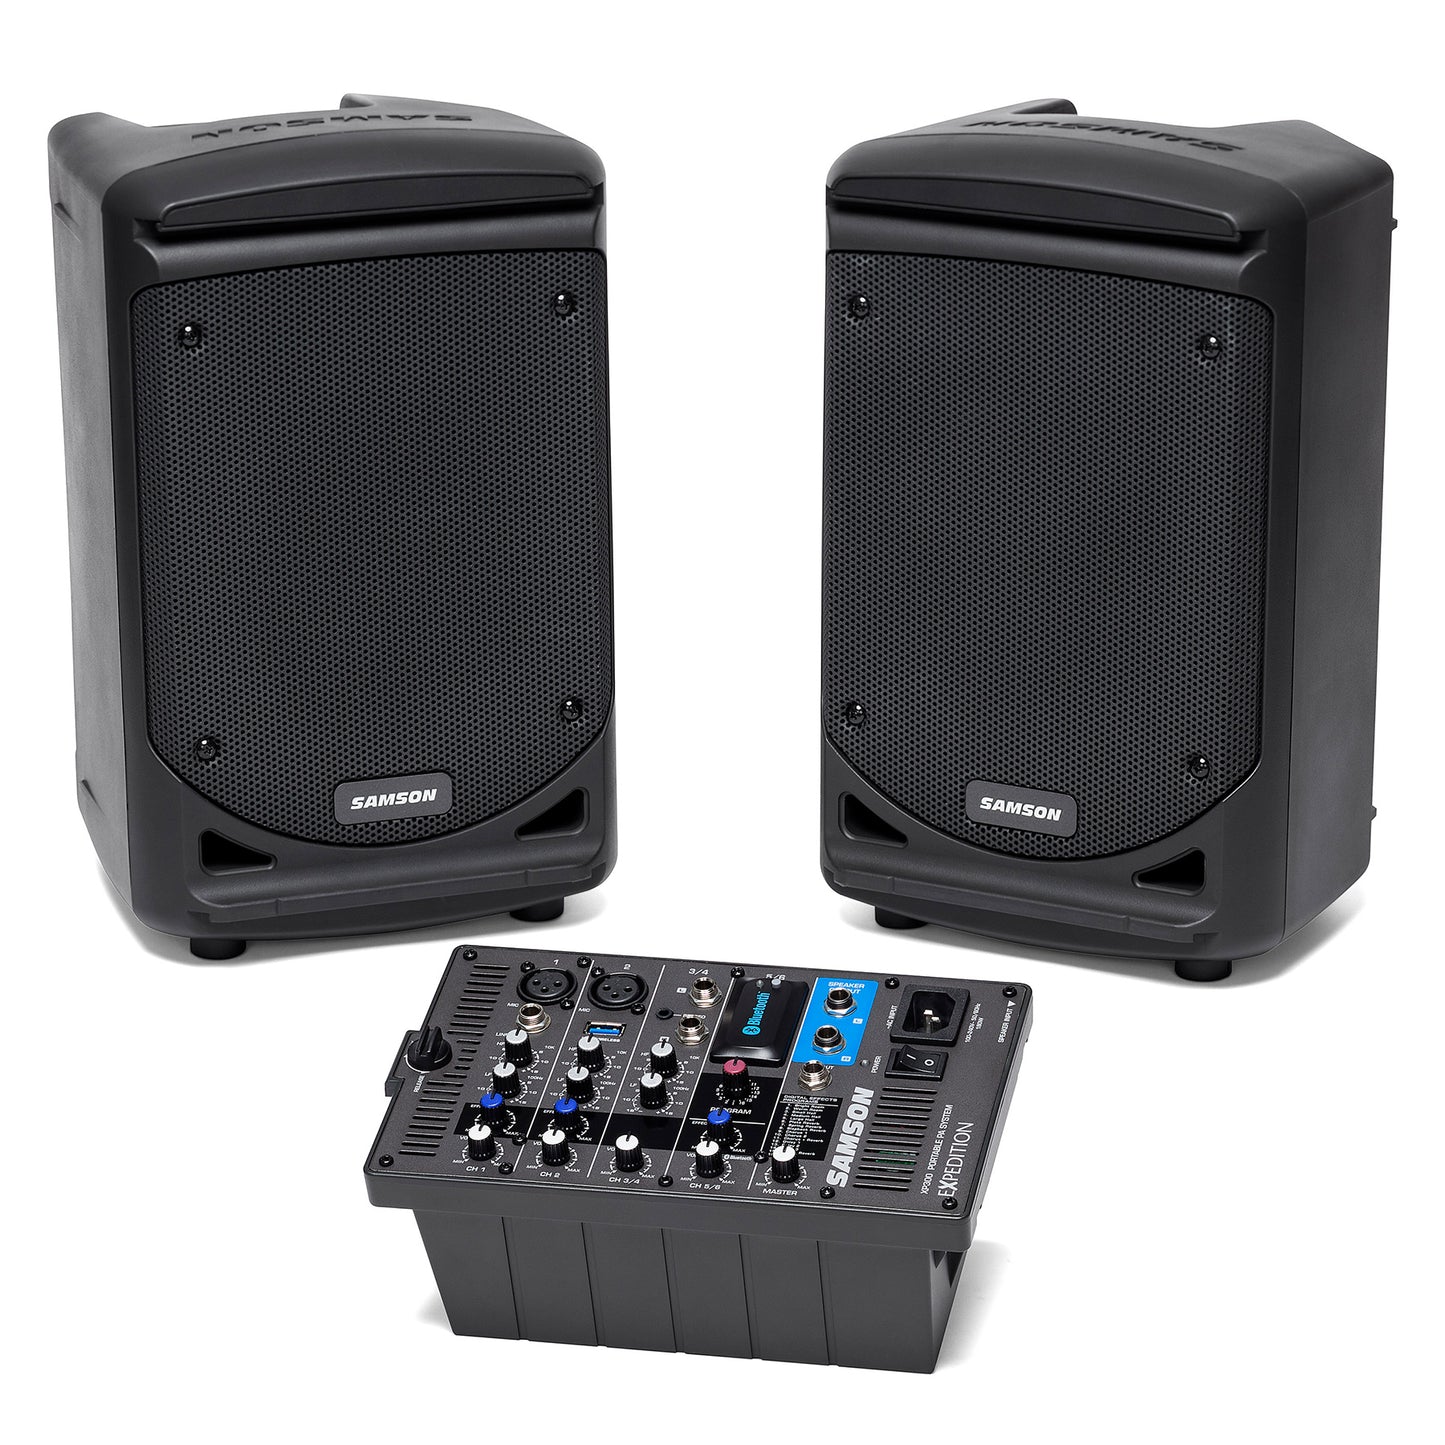 Samson Expedition XP300 Portable Bluetooth PA Sound System 2x150" 300 Watt Speakers with 6" Woofer, 6 Channel Mixer, Phantom Power